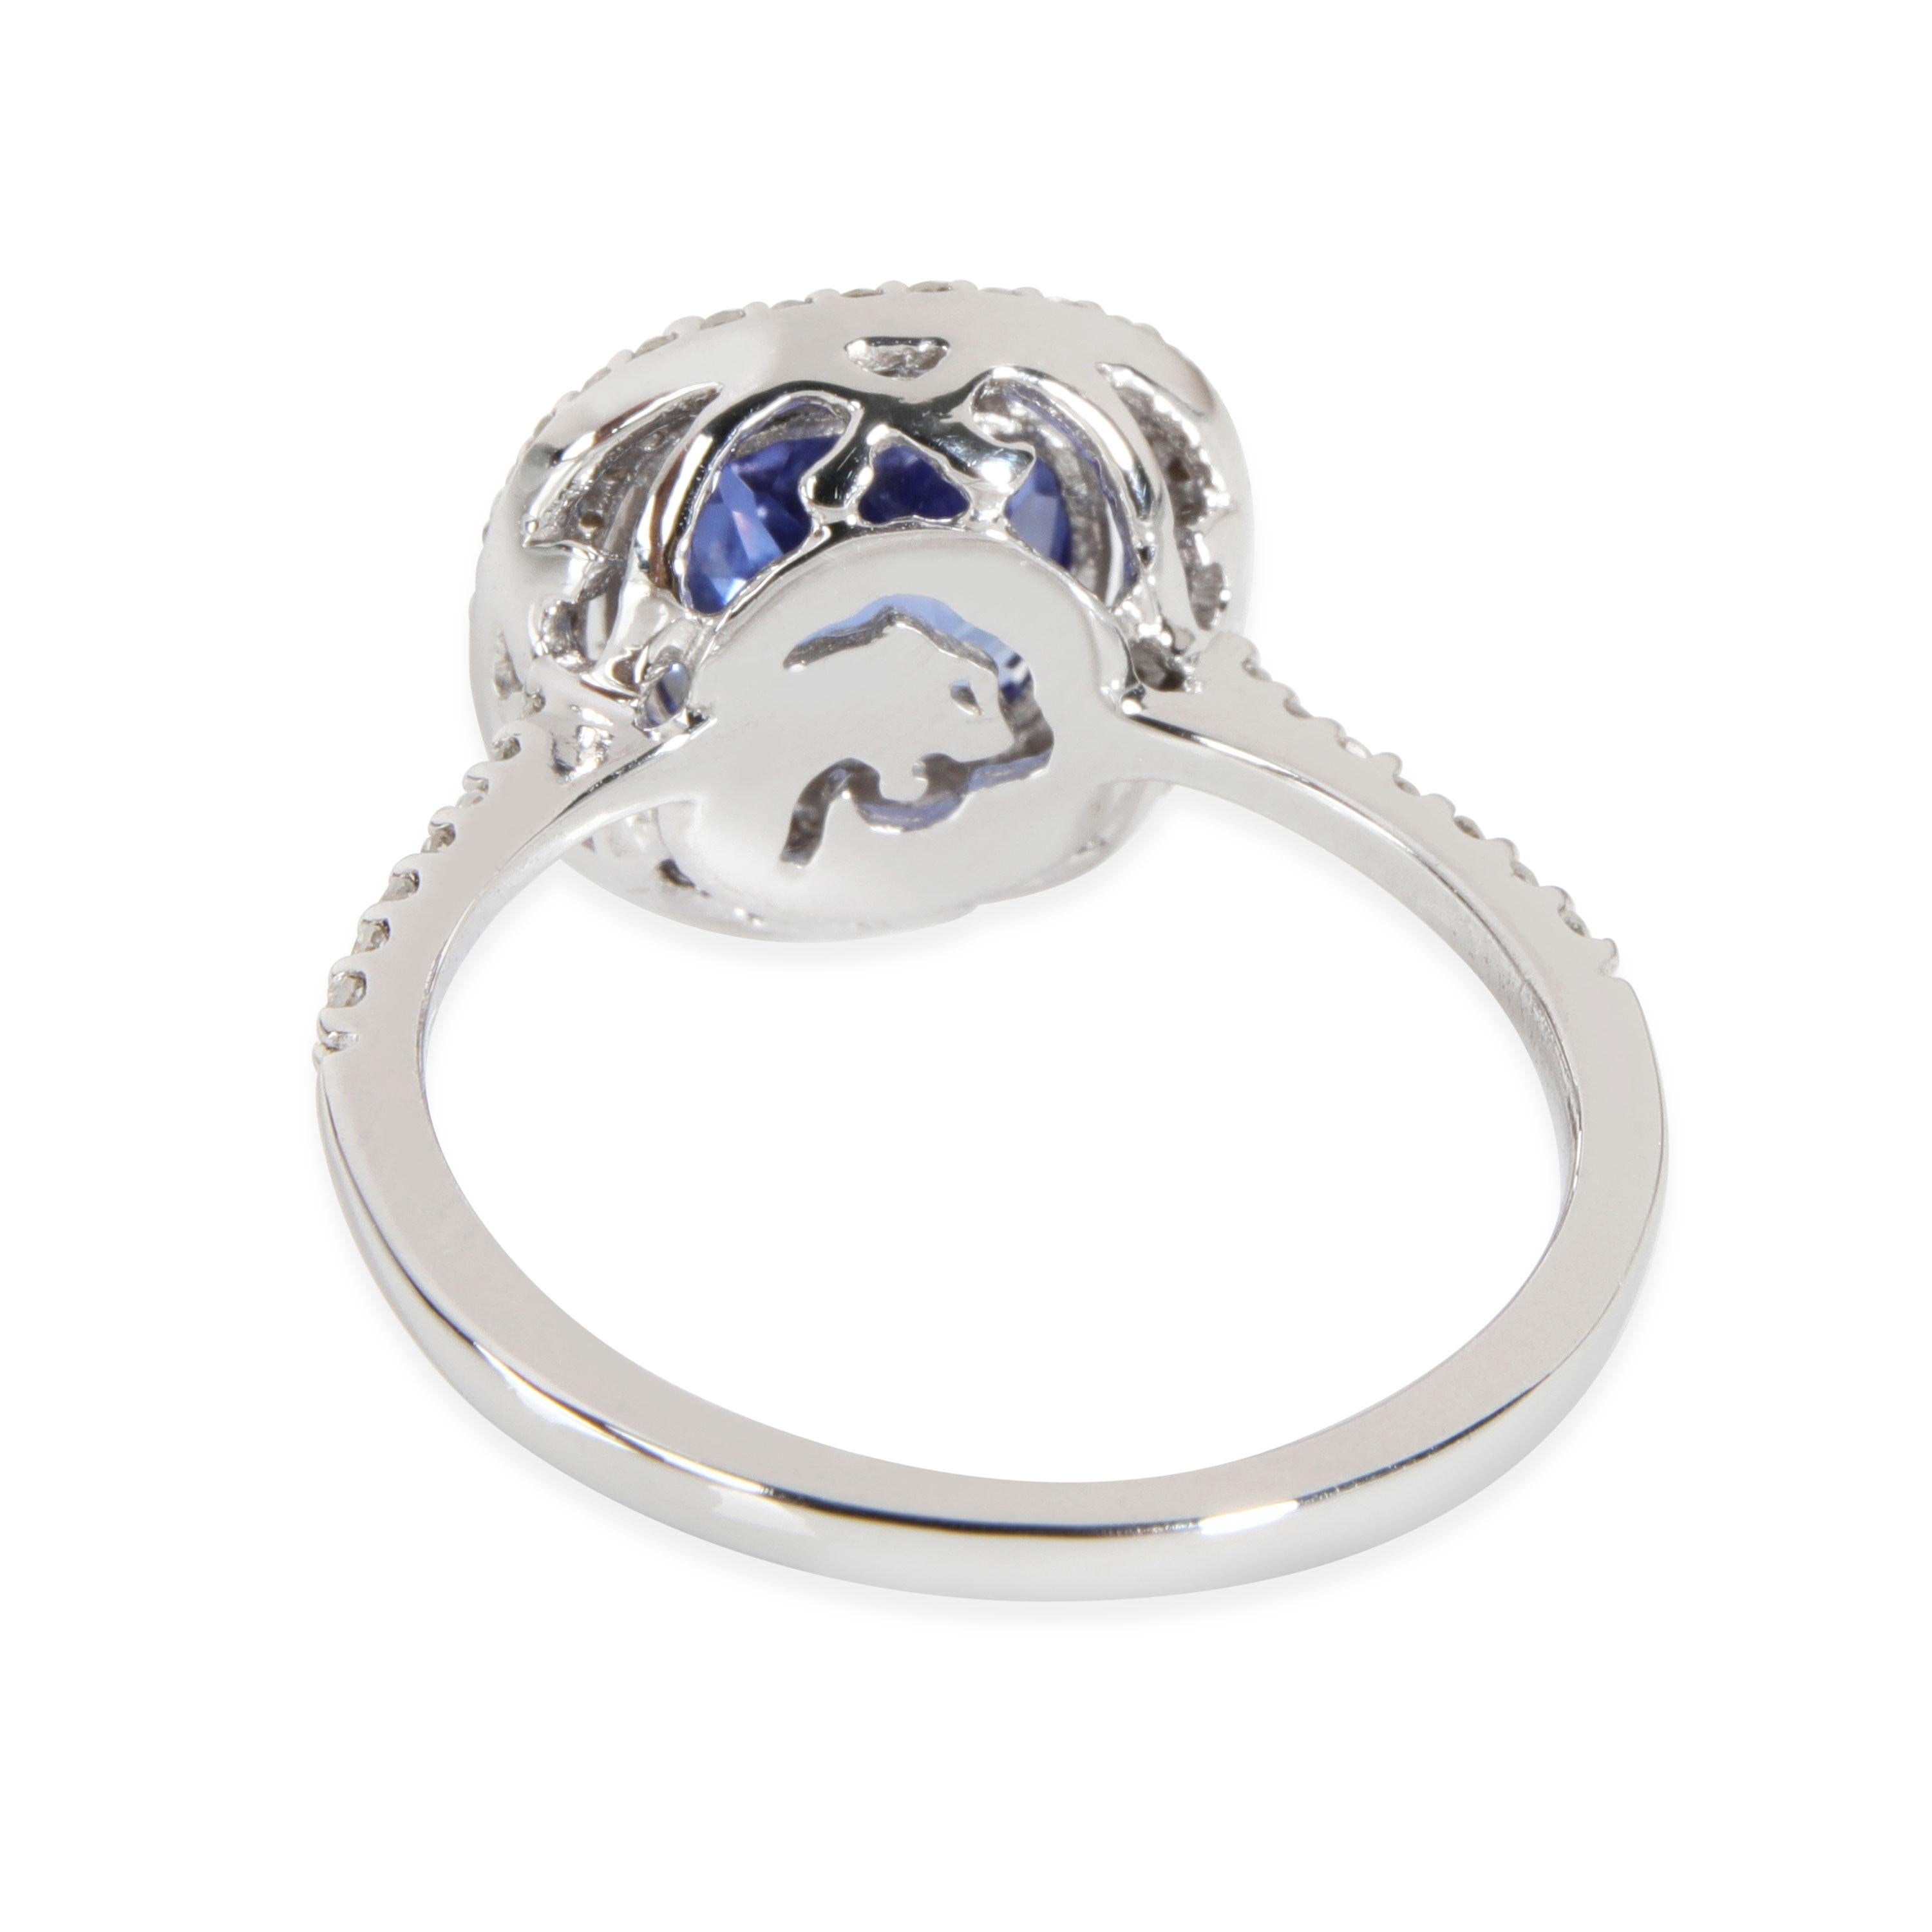 Effy Halo Tanzanite Diamond Fashion Ring in 14K White Gold 0.29 CTW

PRIMARY DETAILS
SKU: 111746
Listing Title: Effy Halo Tanzanite Diamond Fashion Ring in 14K White Gold 0.29 CTW
Condition Description: Retails for 5600 USD. In excellent condition